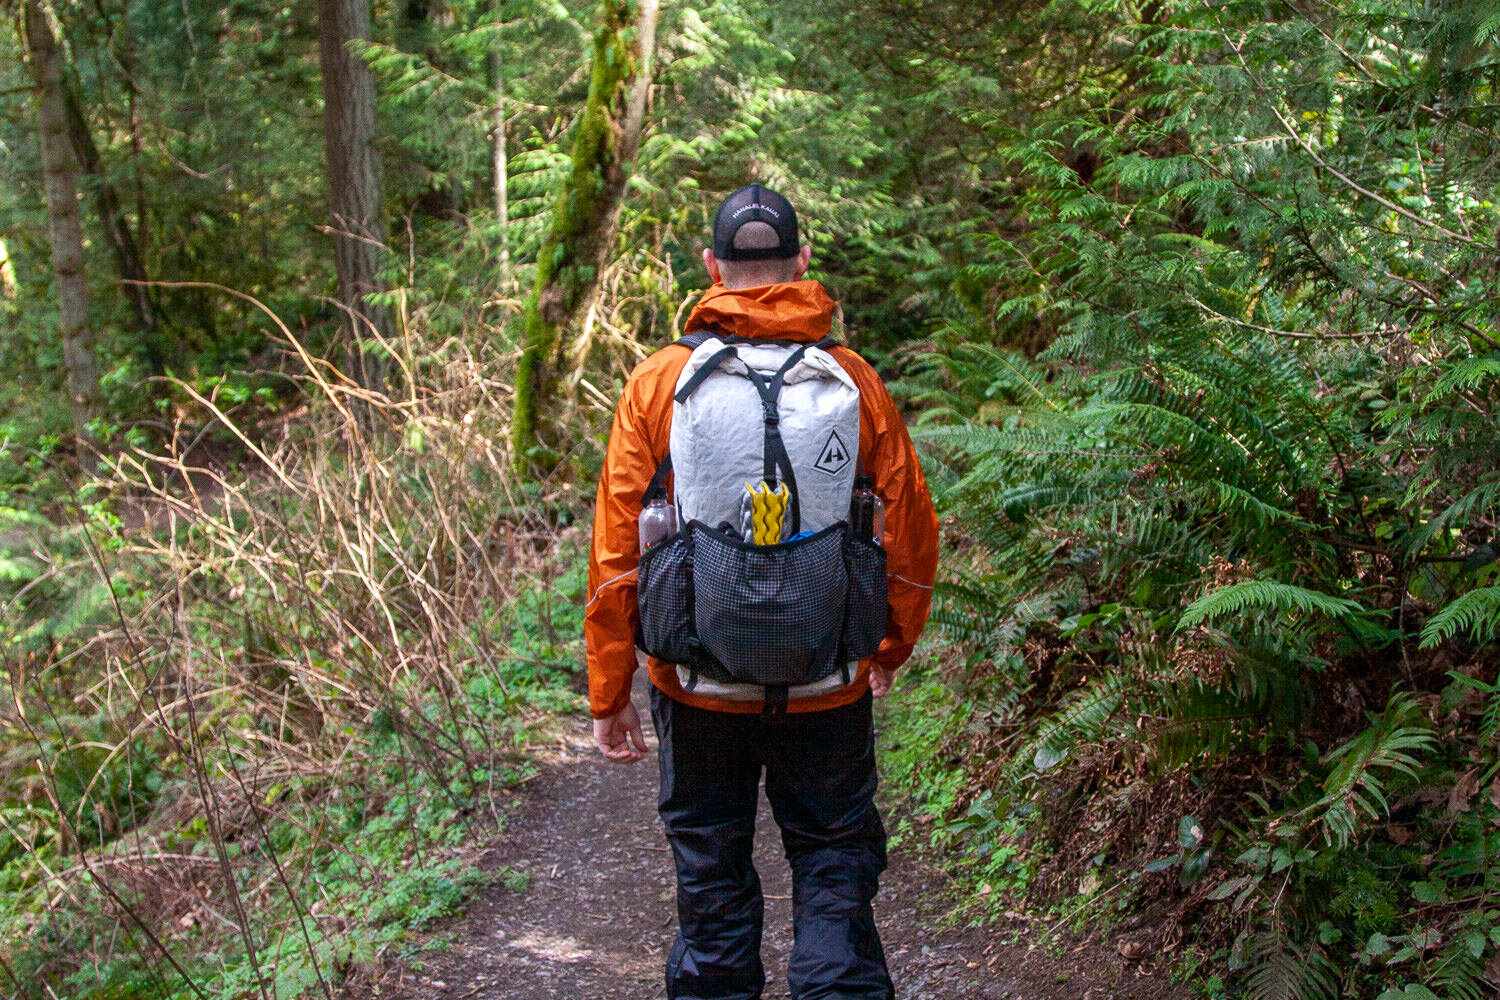 Helium Rainwear is an excellent choice for activities like backpacking since it’s so compact and lightweight